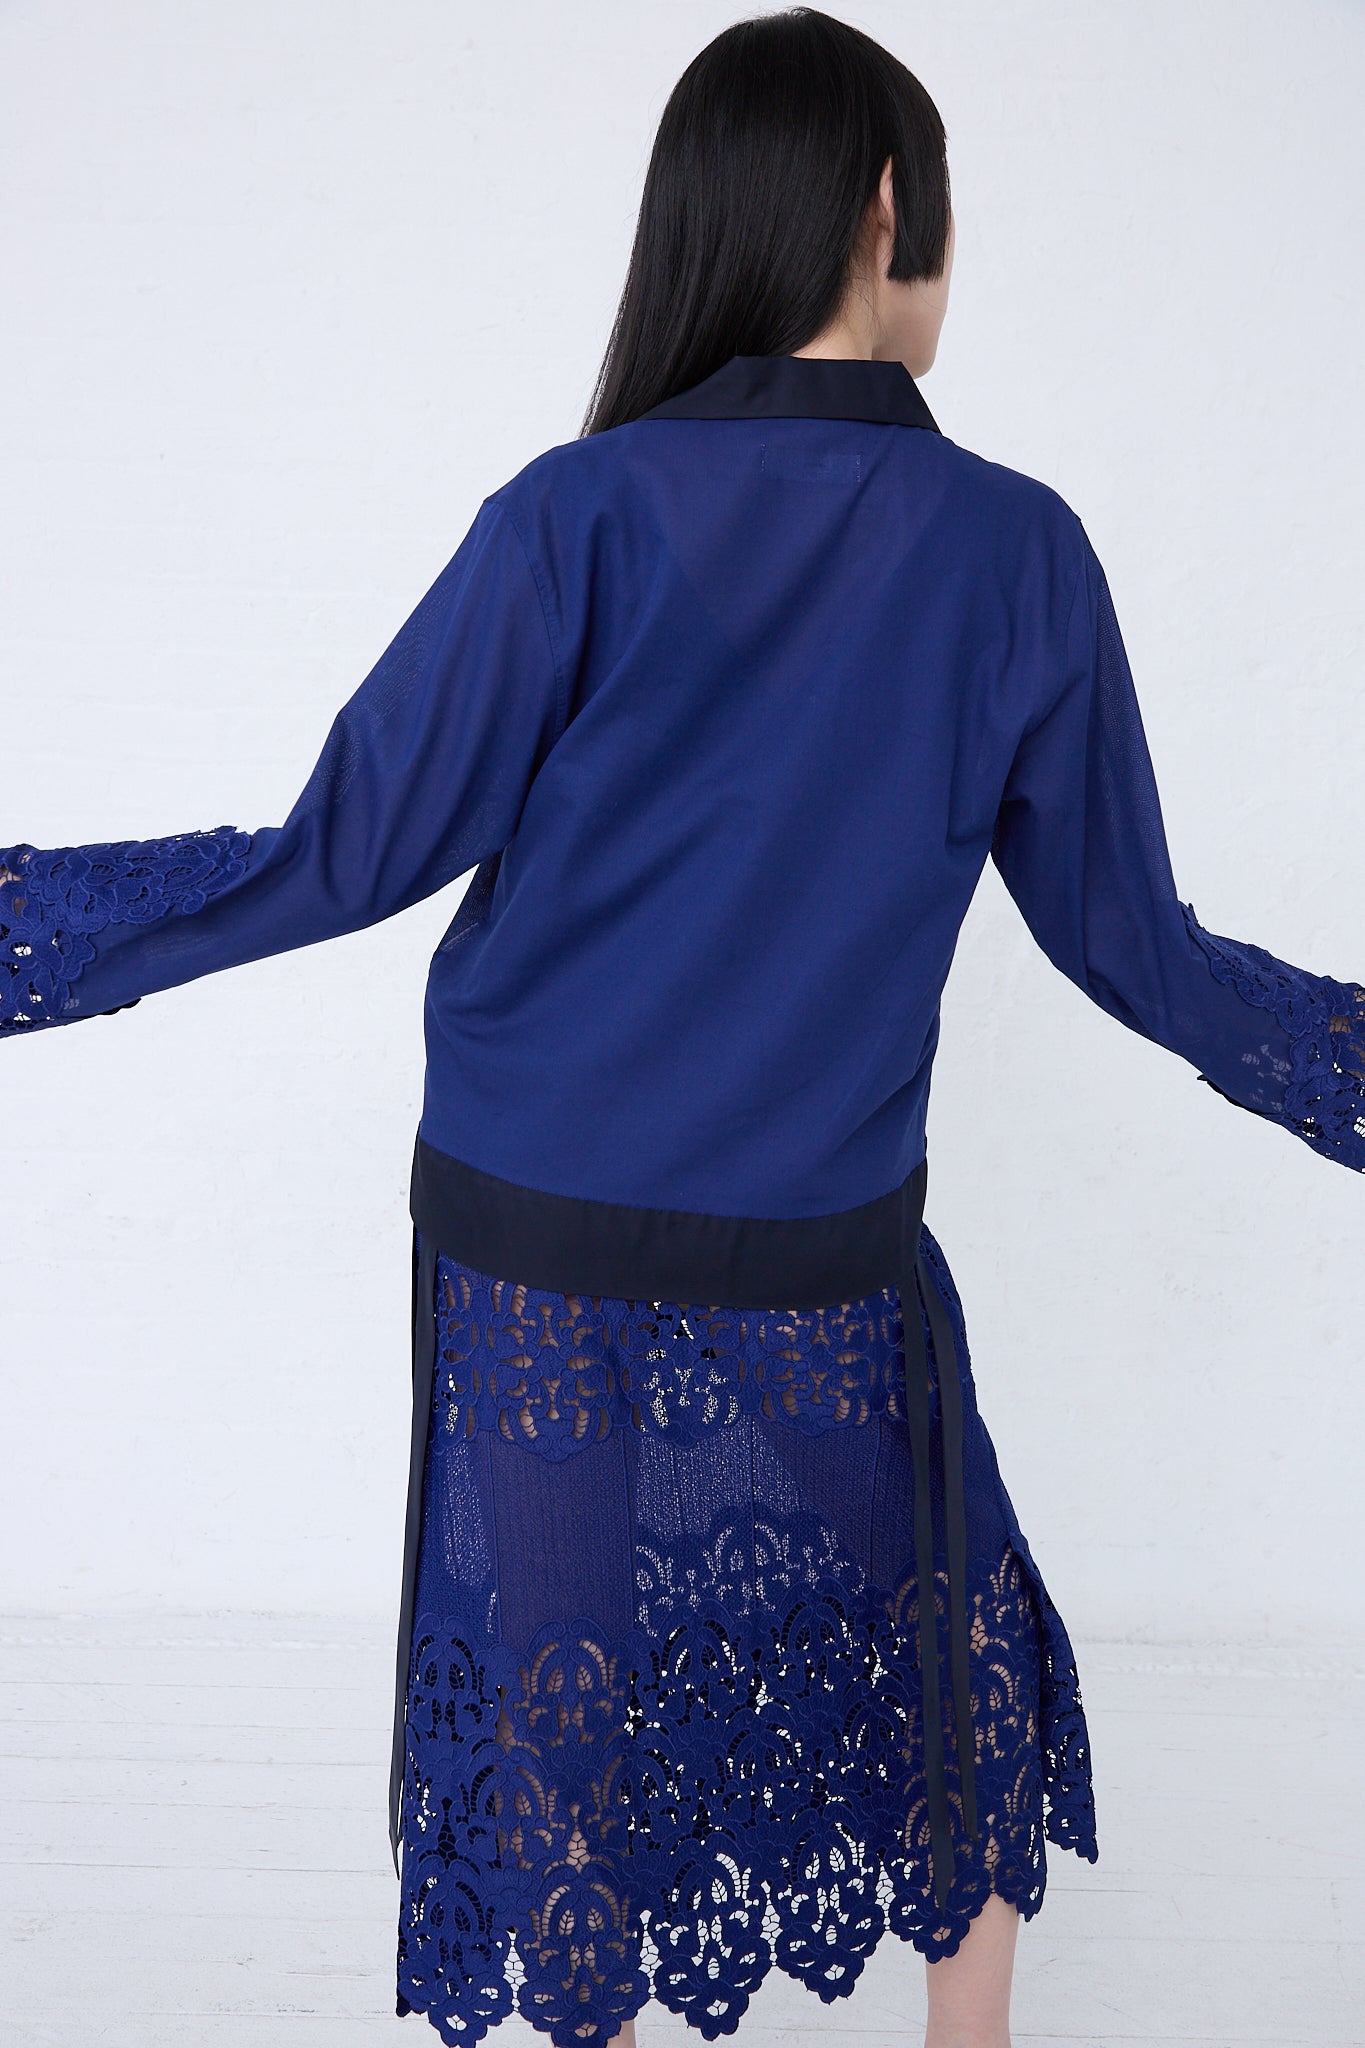 A woman from behind, wearing a TOGA ARCHIVES Mesh Lace Shirt in Blue with relaxed fit detailing at the bottom, standing against a white background.